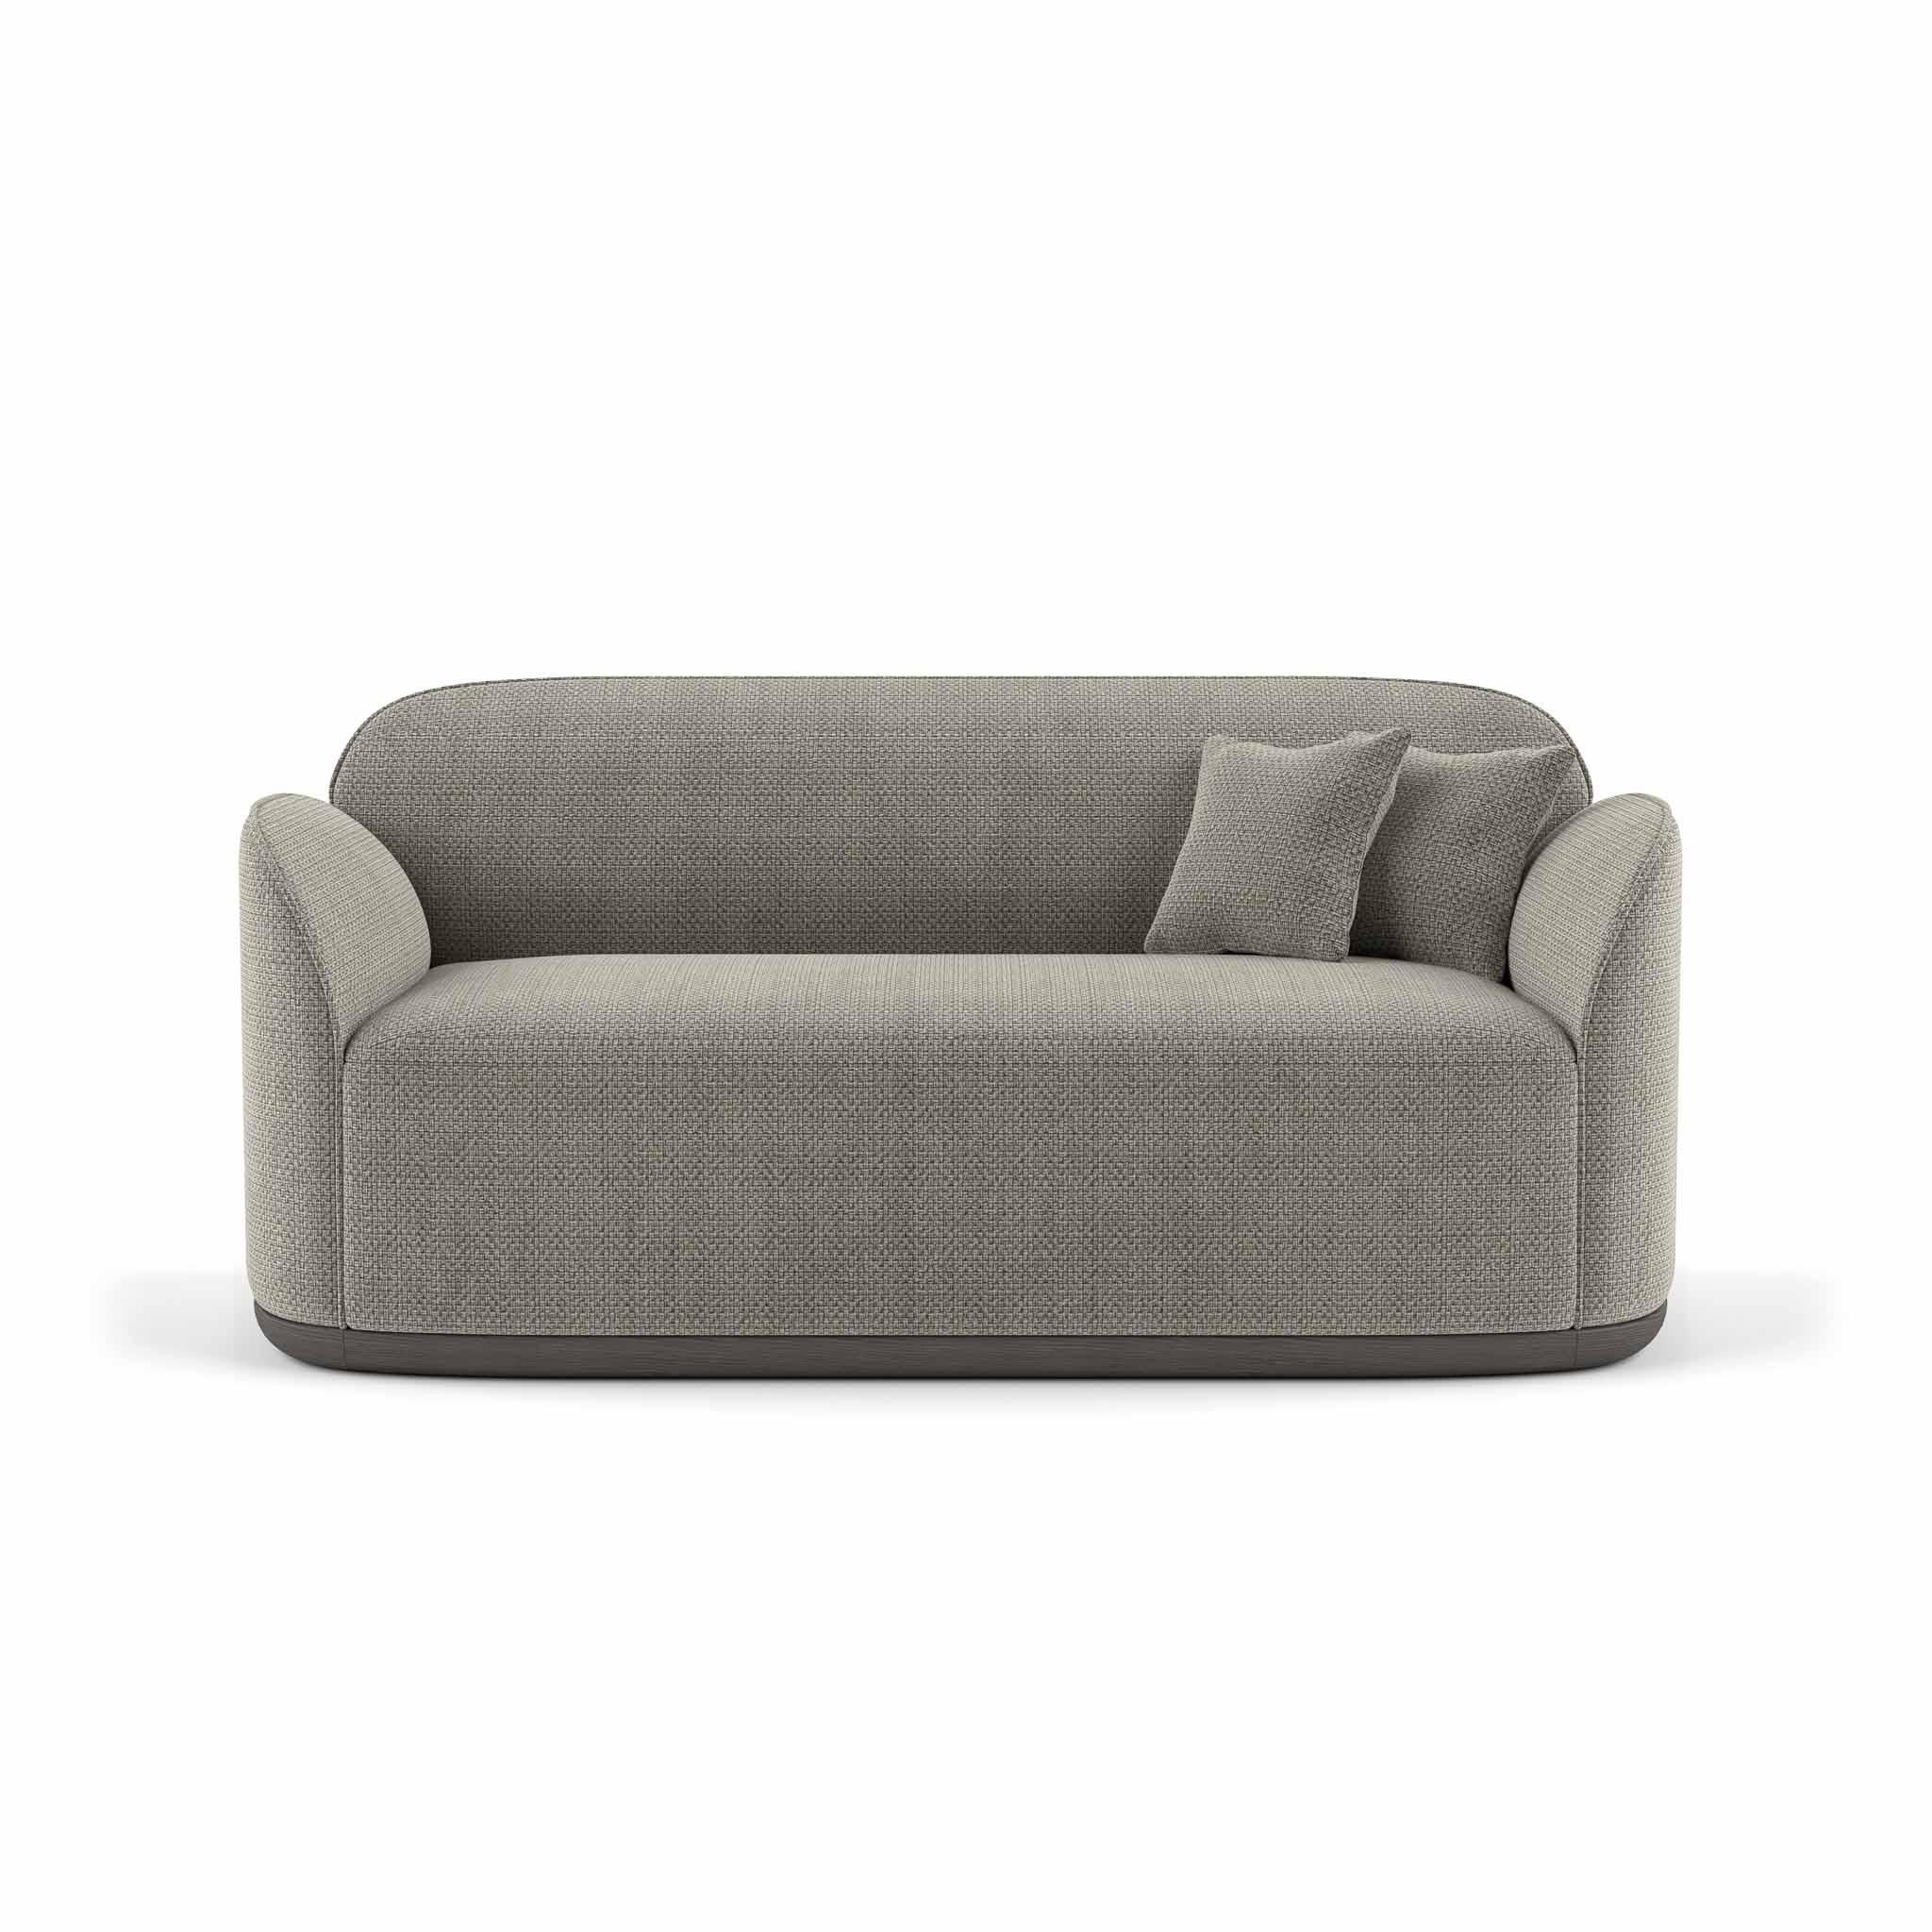 Contemporary Loveseat 'Unio' by Poiat, Fabric Hanoi 04 by Pierre Frey For Sale 2